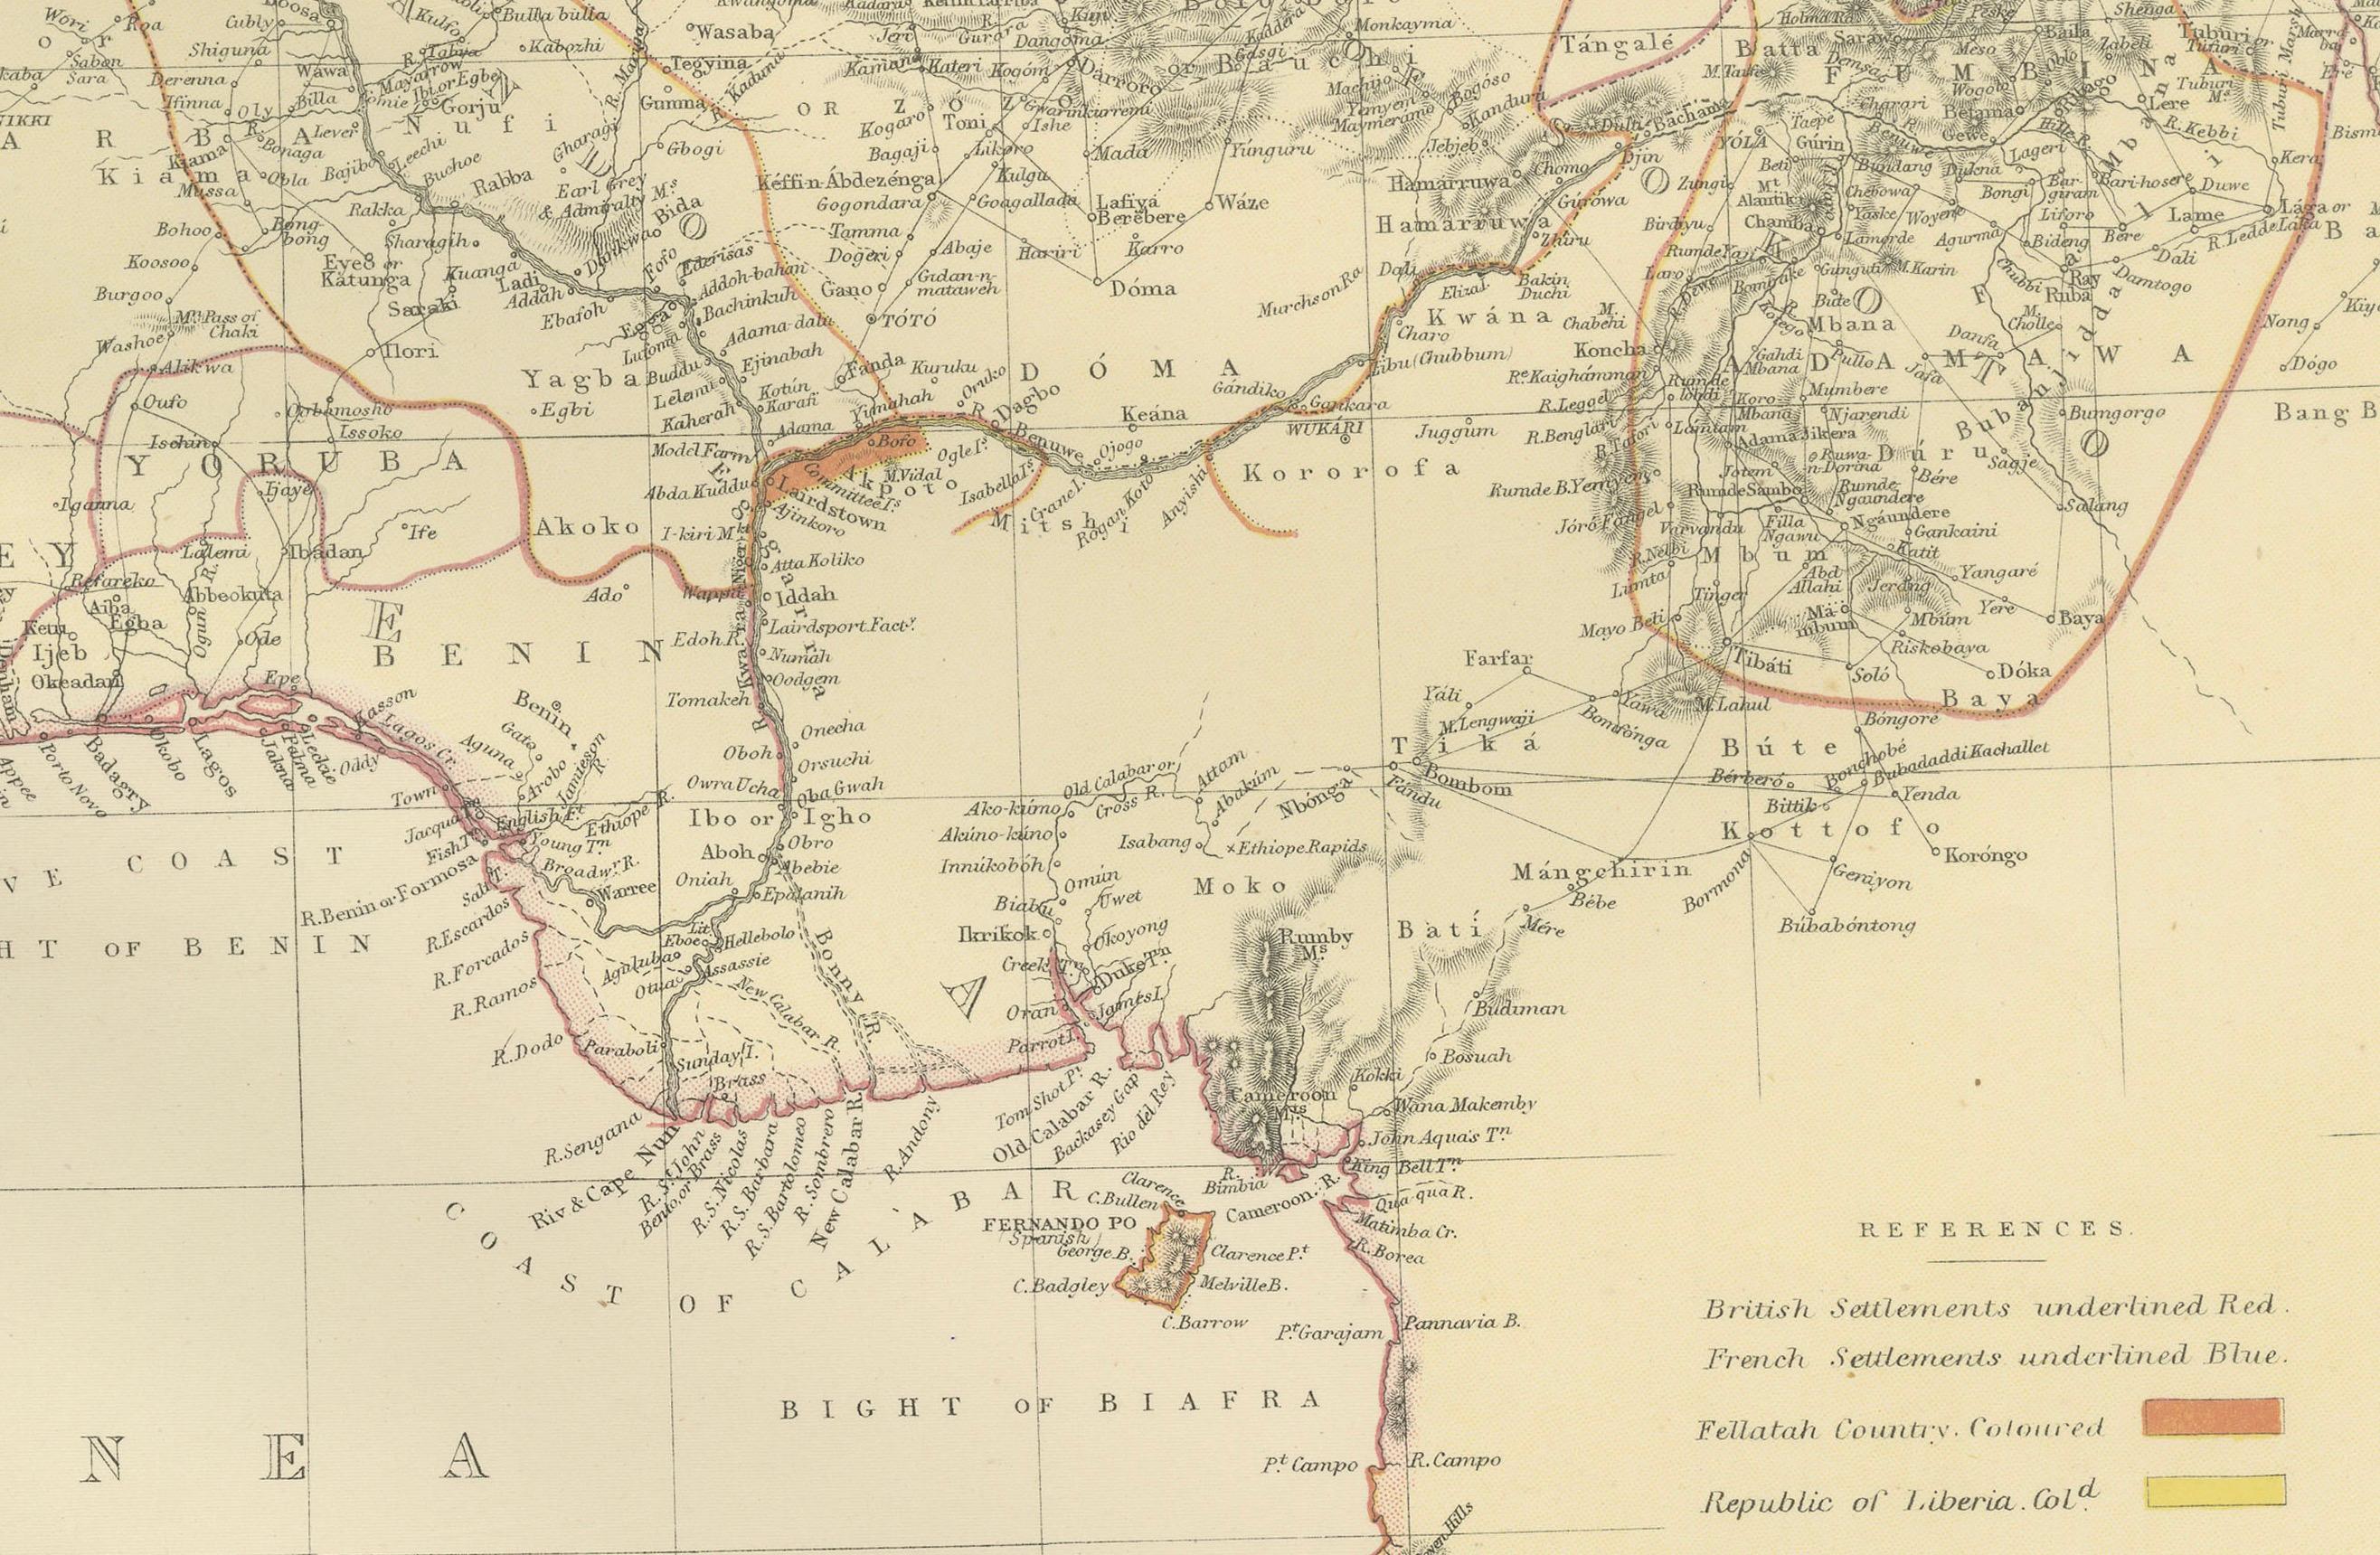 This is a map of Western Africa from the 1882 Blackie & Son atlas. The map details the West African coast from the Sahara Desert in the north down to the Gulf of Guinea, including a large section of inland territory.

What makes this map